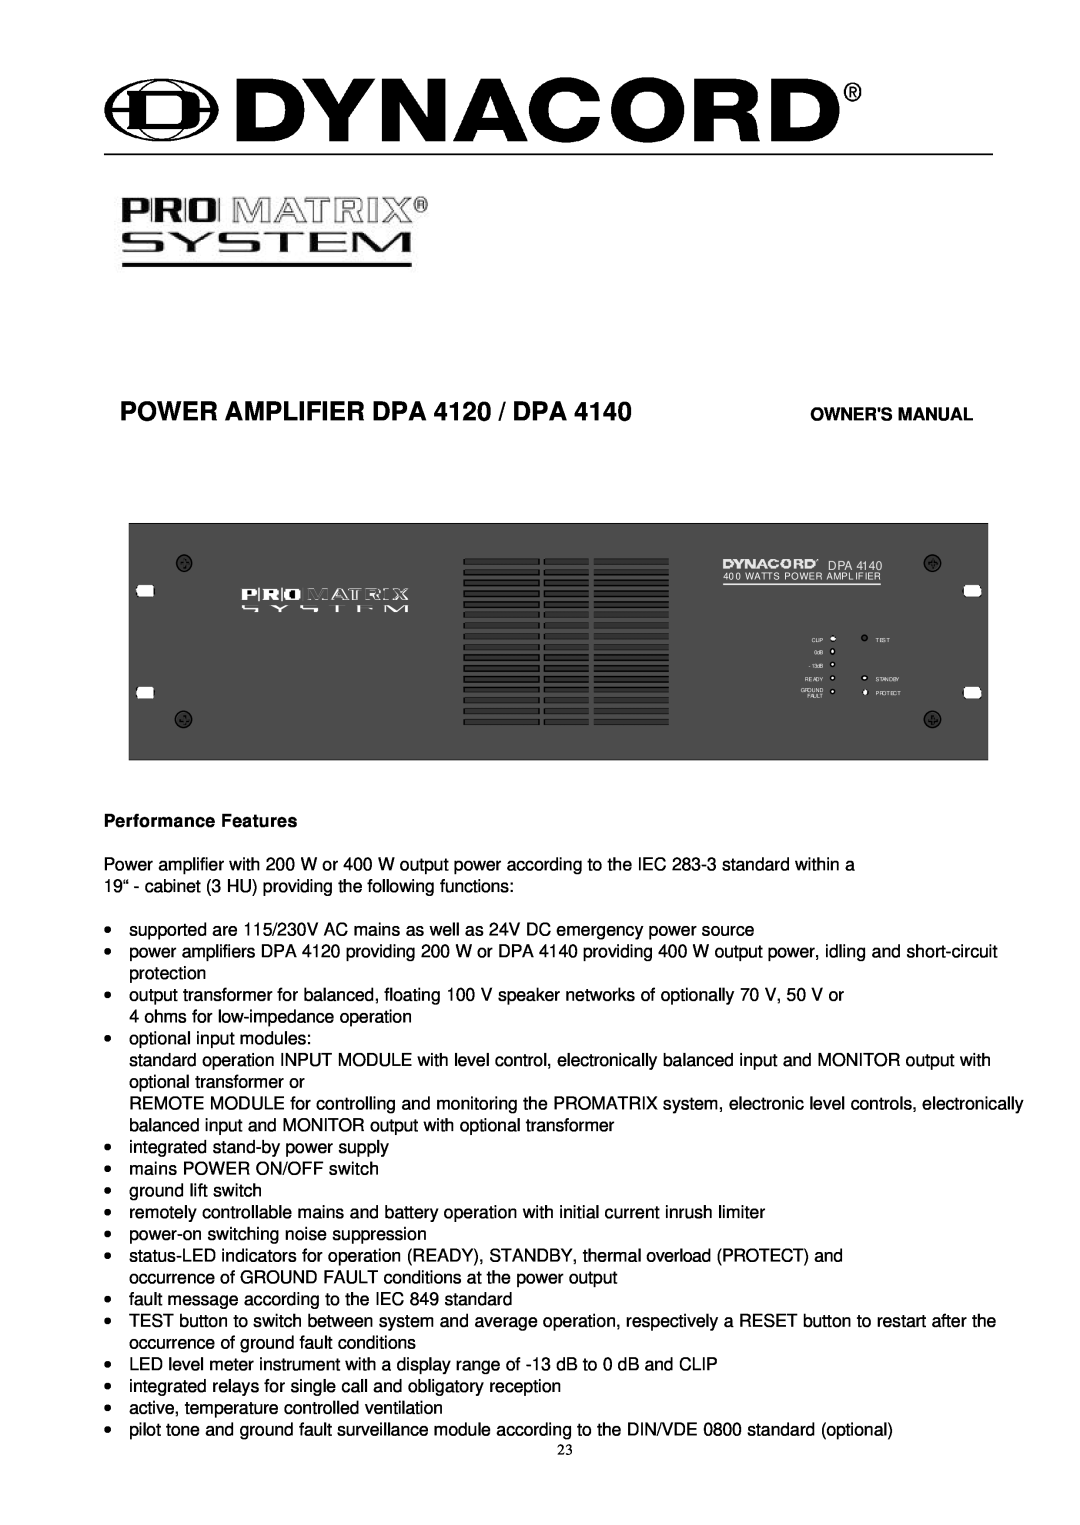 Dynacord DPA 4140 owner manual Performance Features, POWER AMPLIFIER DPA 4120 / DPA 